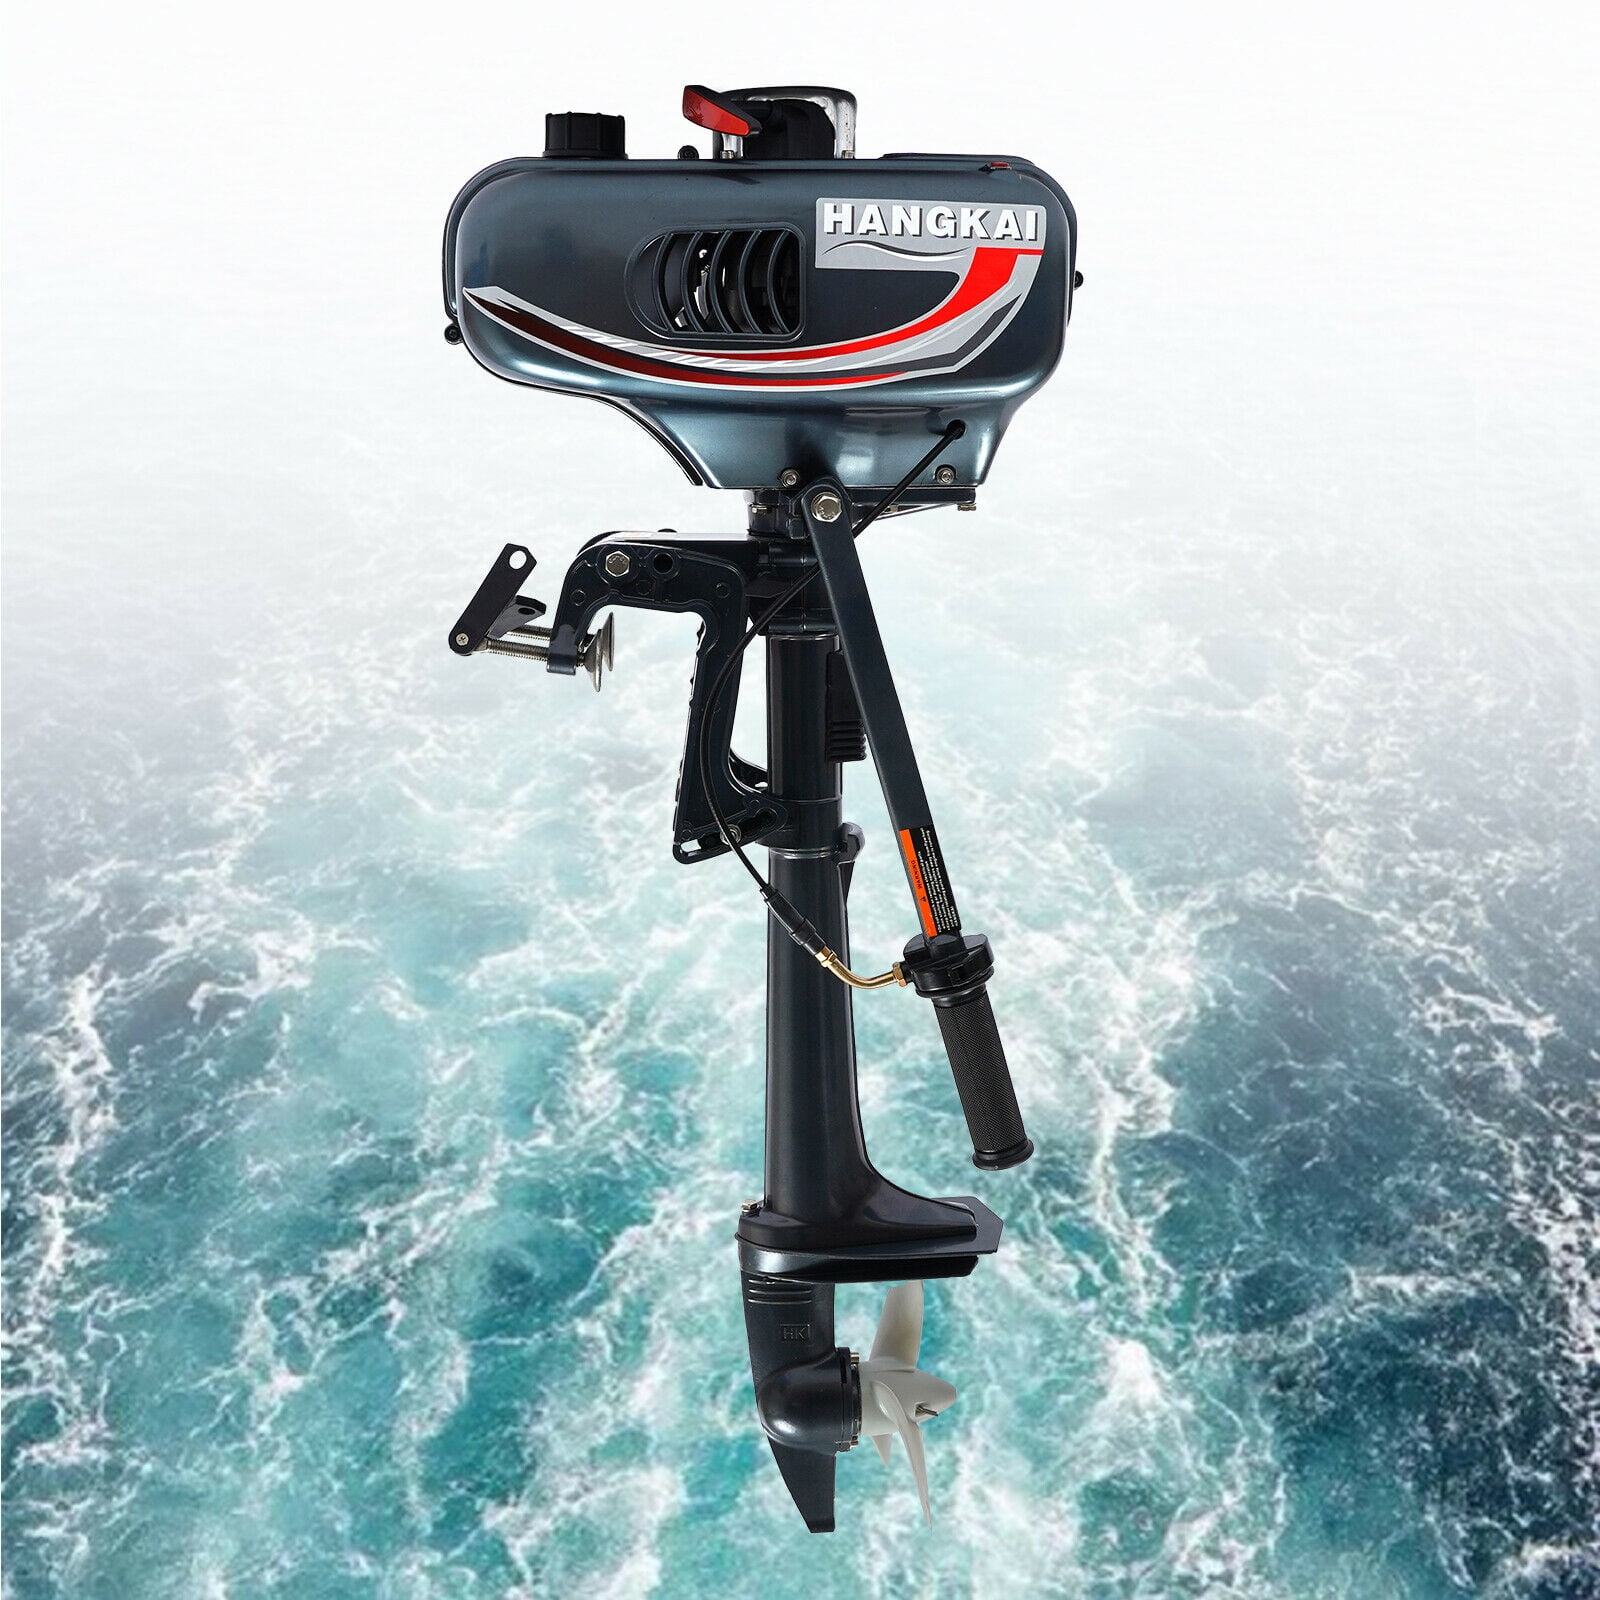 Fishing Boat Engine with CDI System HANGKAI 2 Stroke Outboard Motor 2500W 3.5HP 